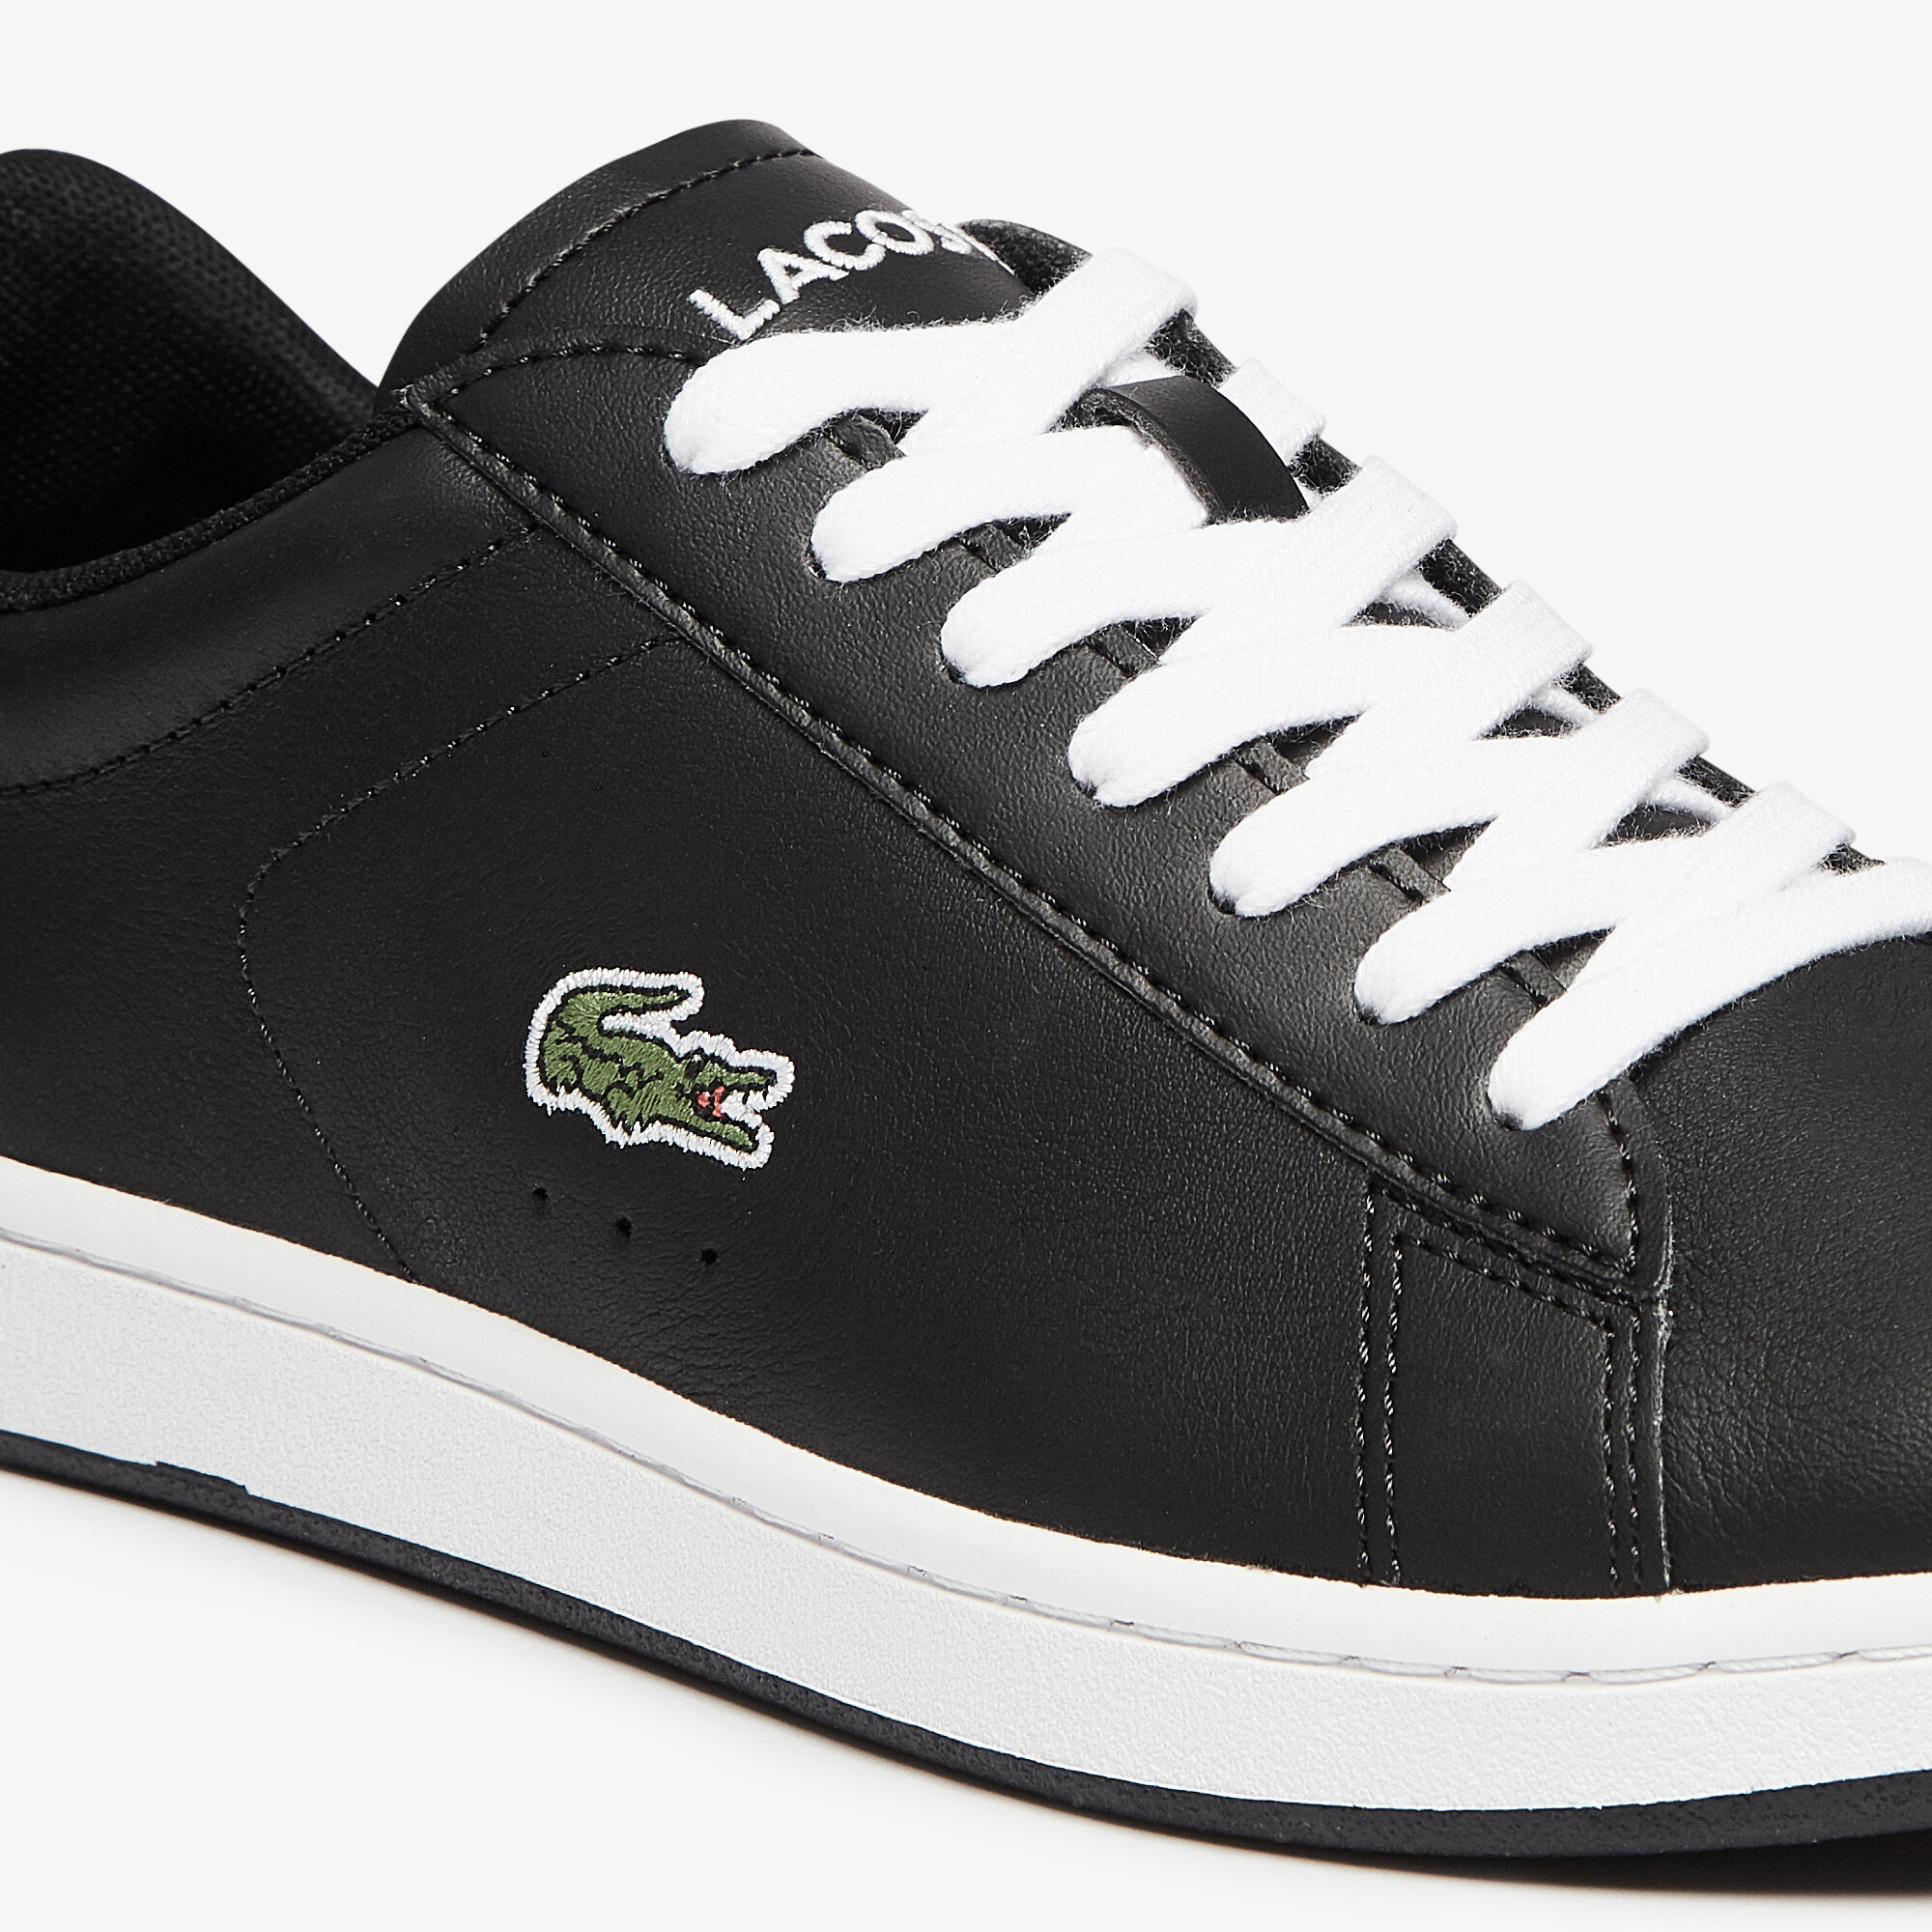 Women's Carnaby Evo Leather Trainers